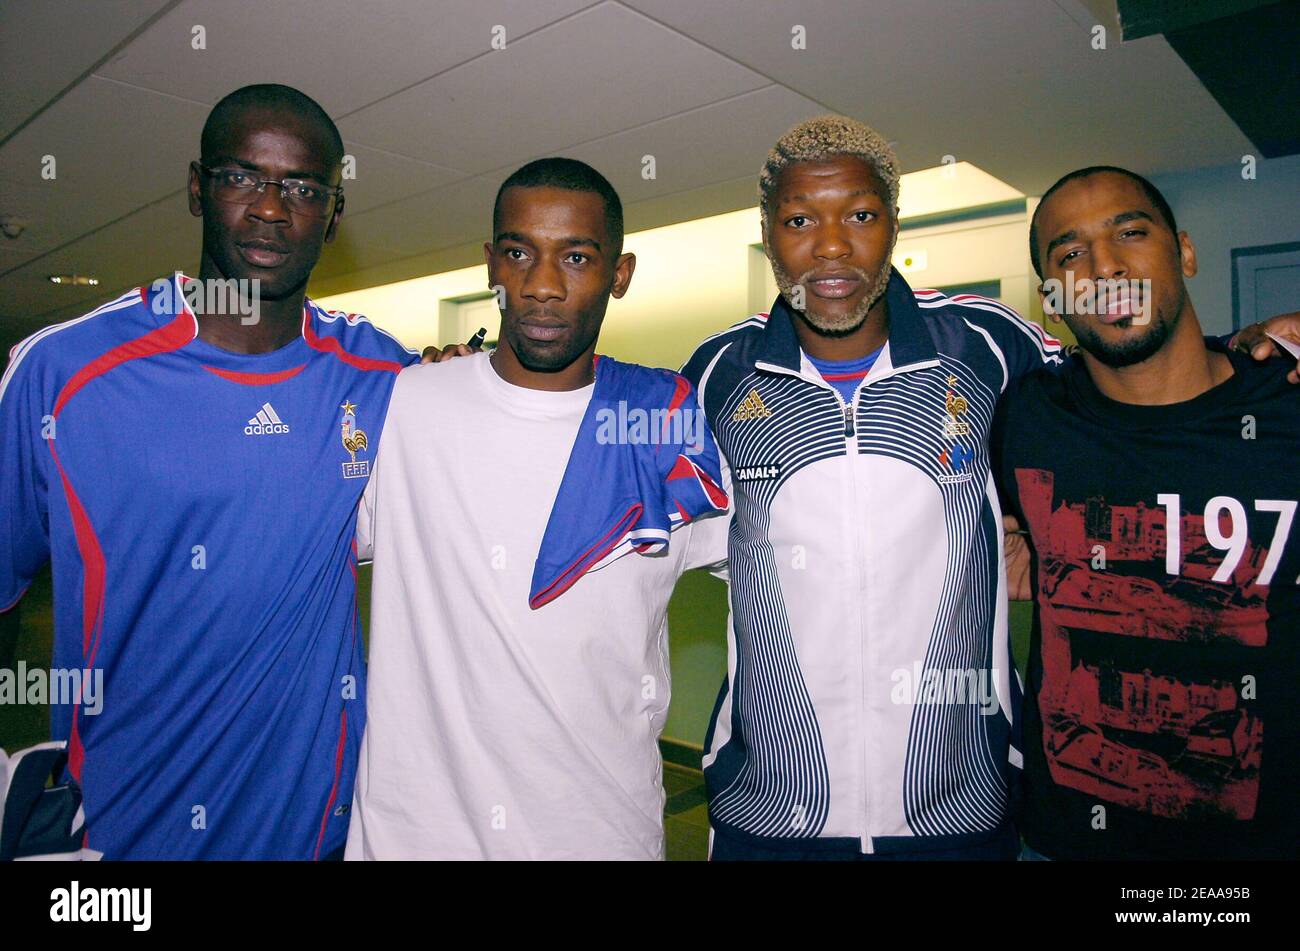 L-R) French national soccer player Lilian Thuram, singer Passy, national  player Djibril Cisse and singer Stomy Bugsy at the presentation of the  French national soccer team's new Adidas shirt for the 2006